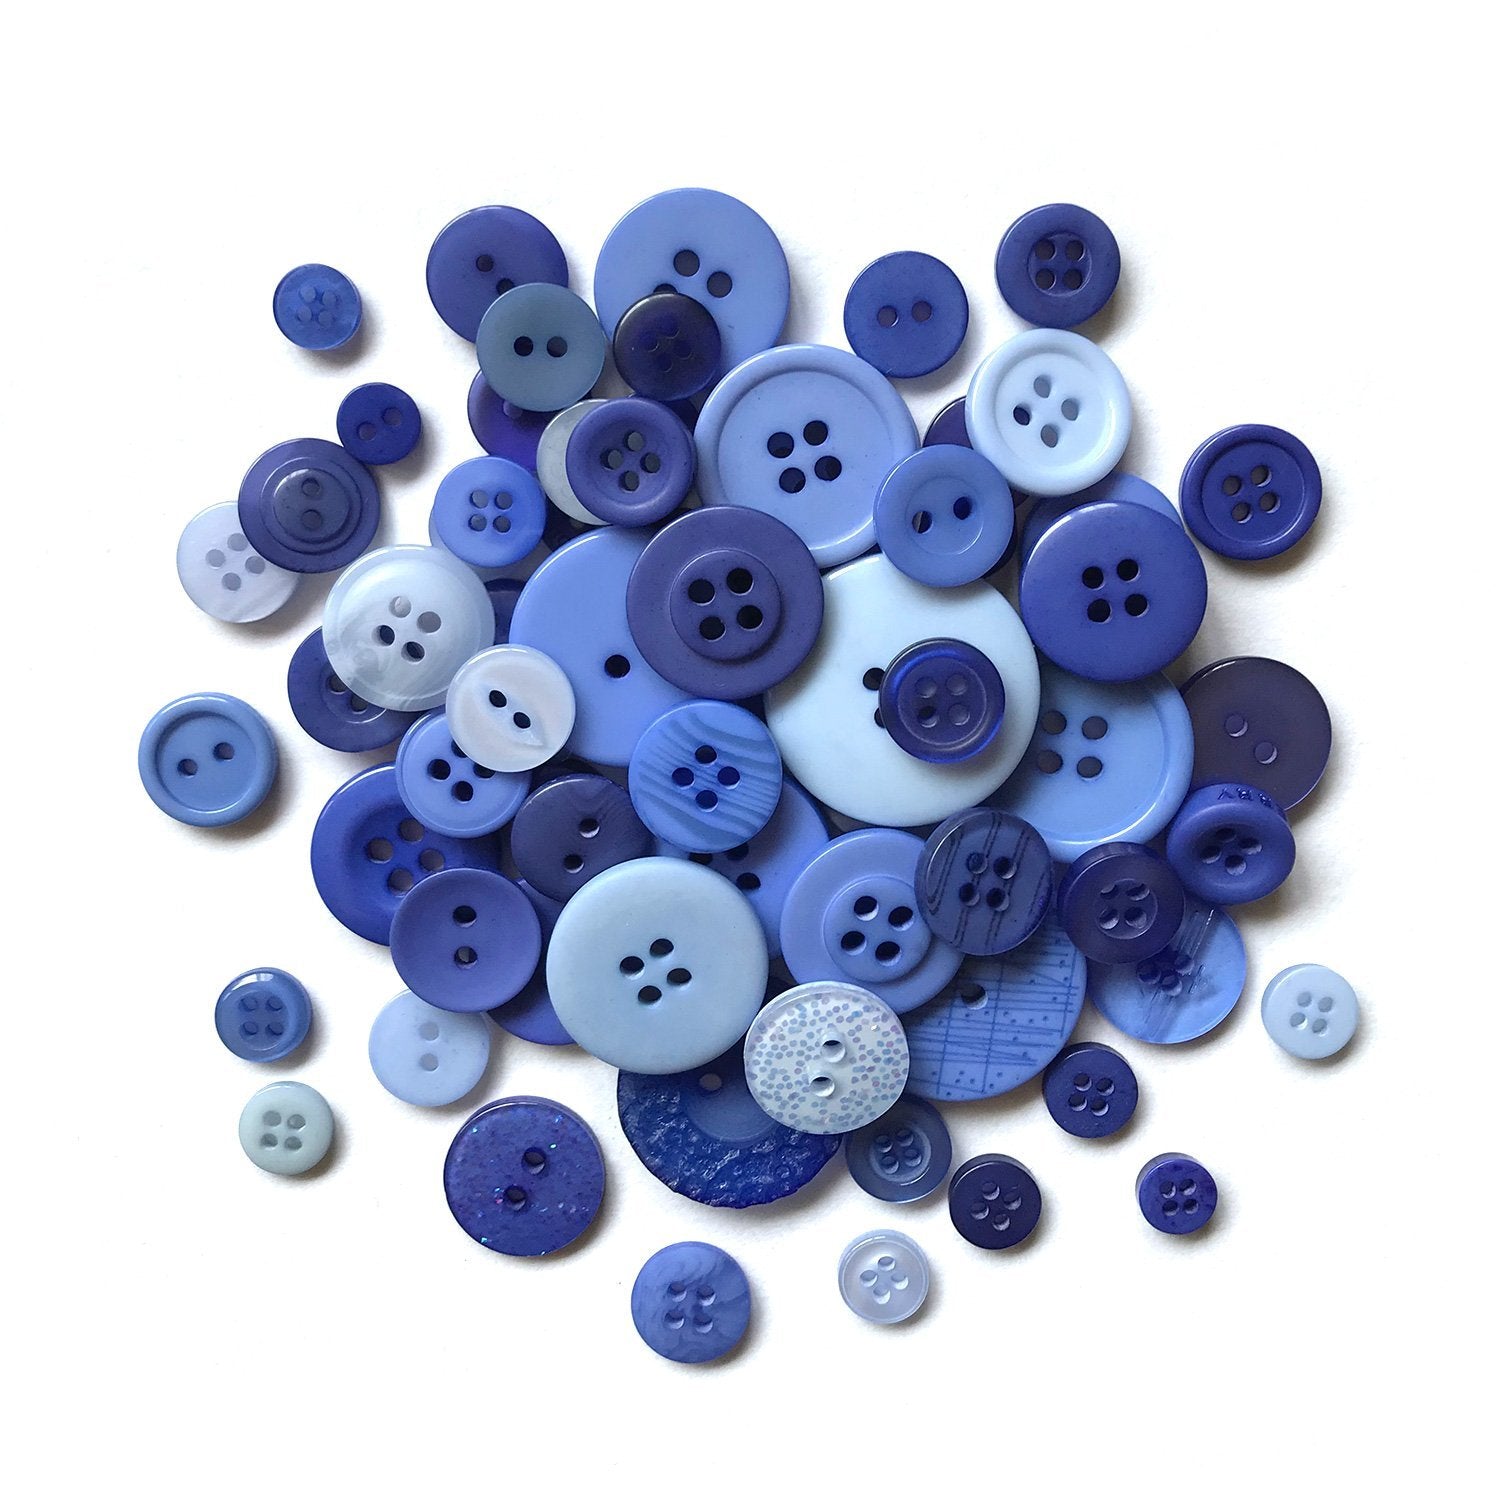 Periwinkle Garden-MJ114 - Buttons Galore and More